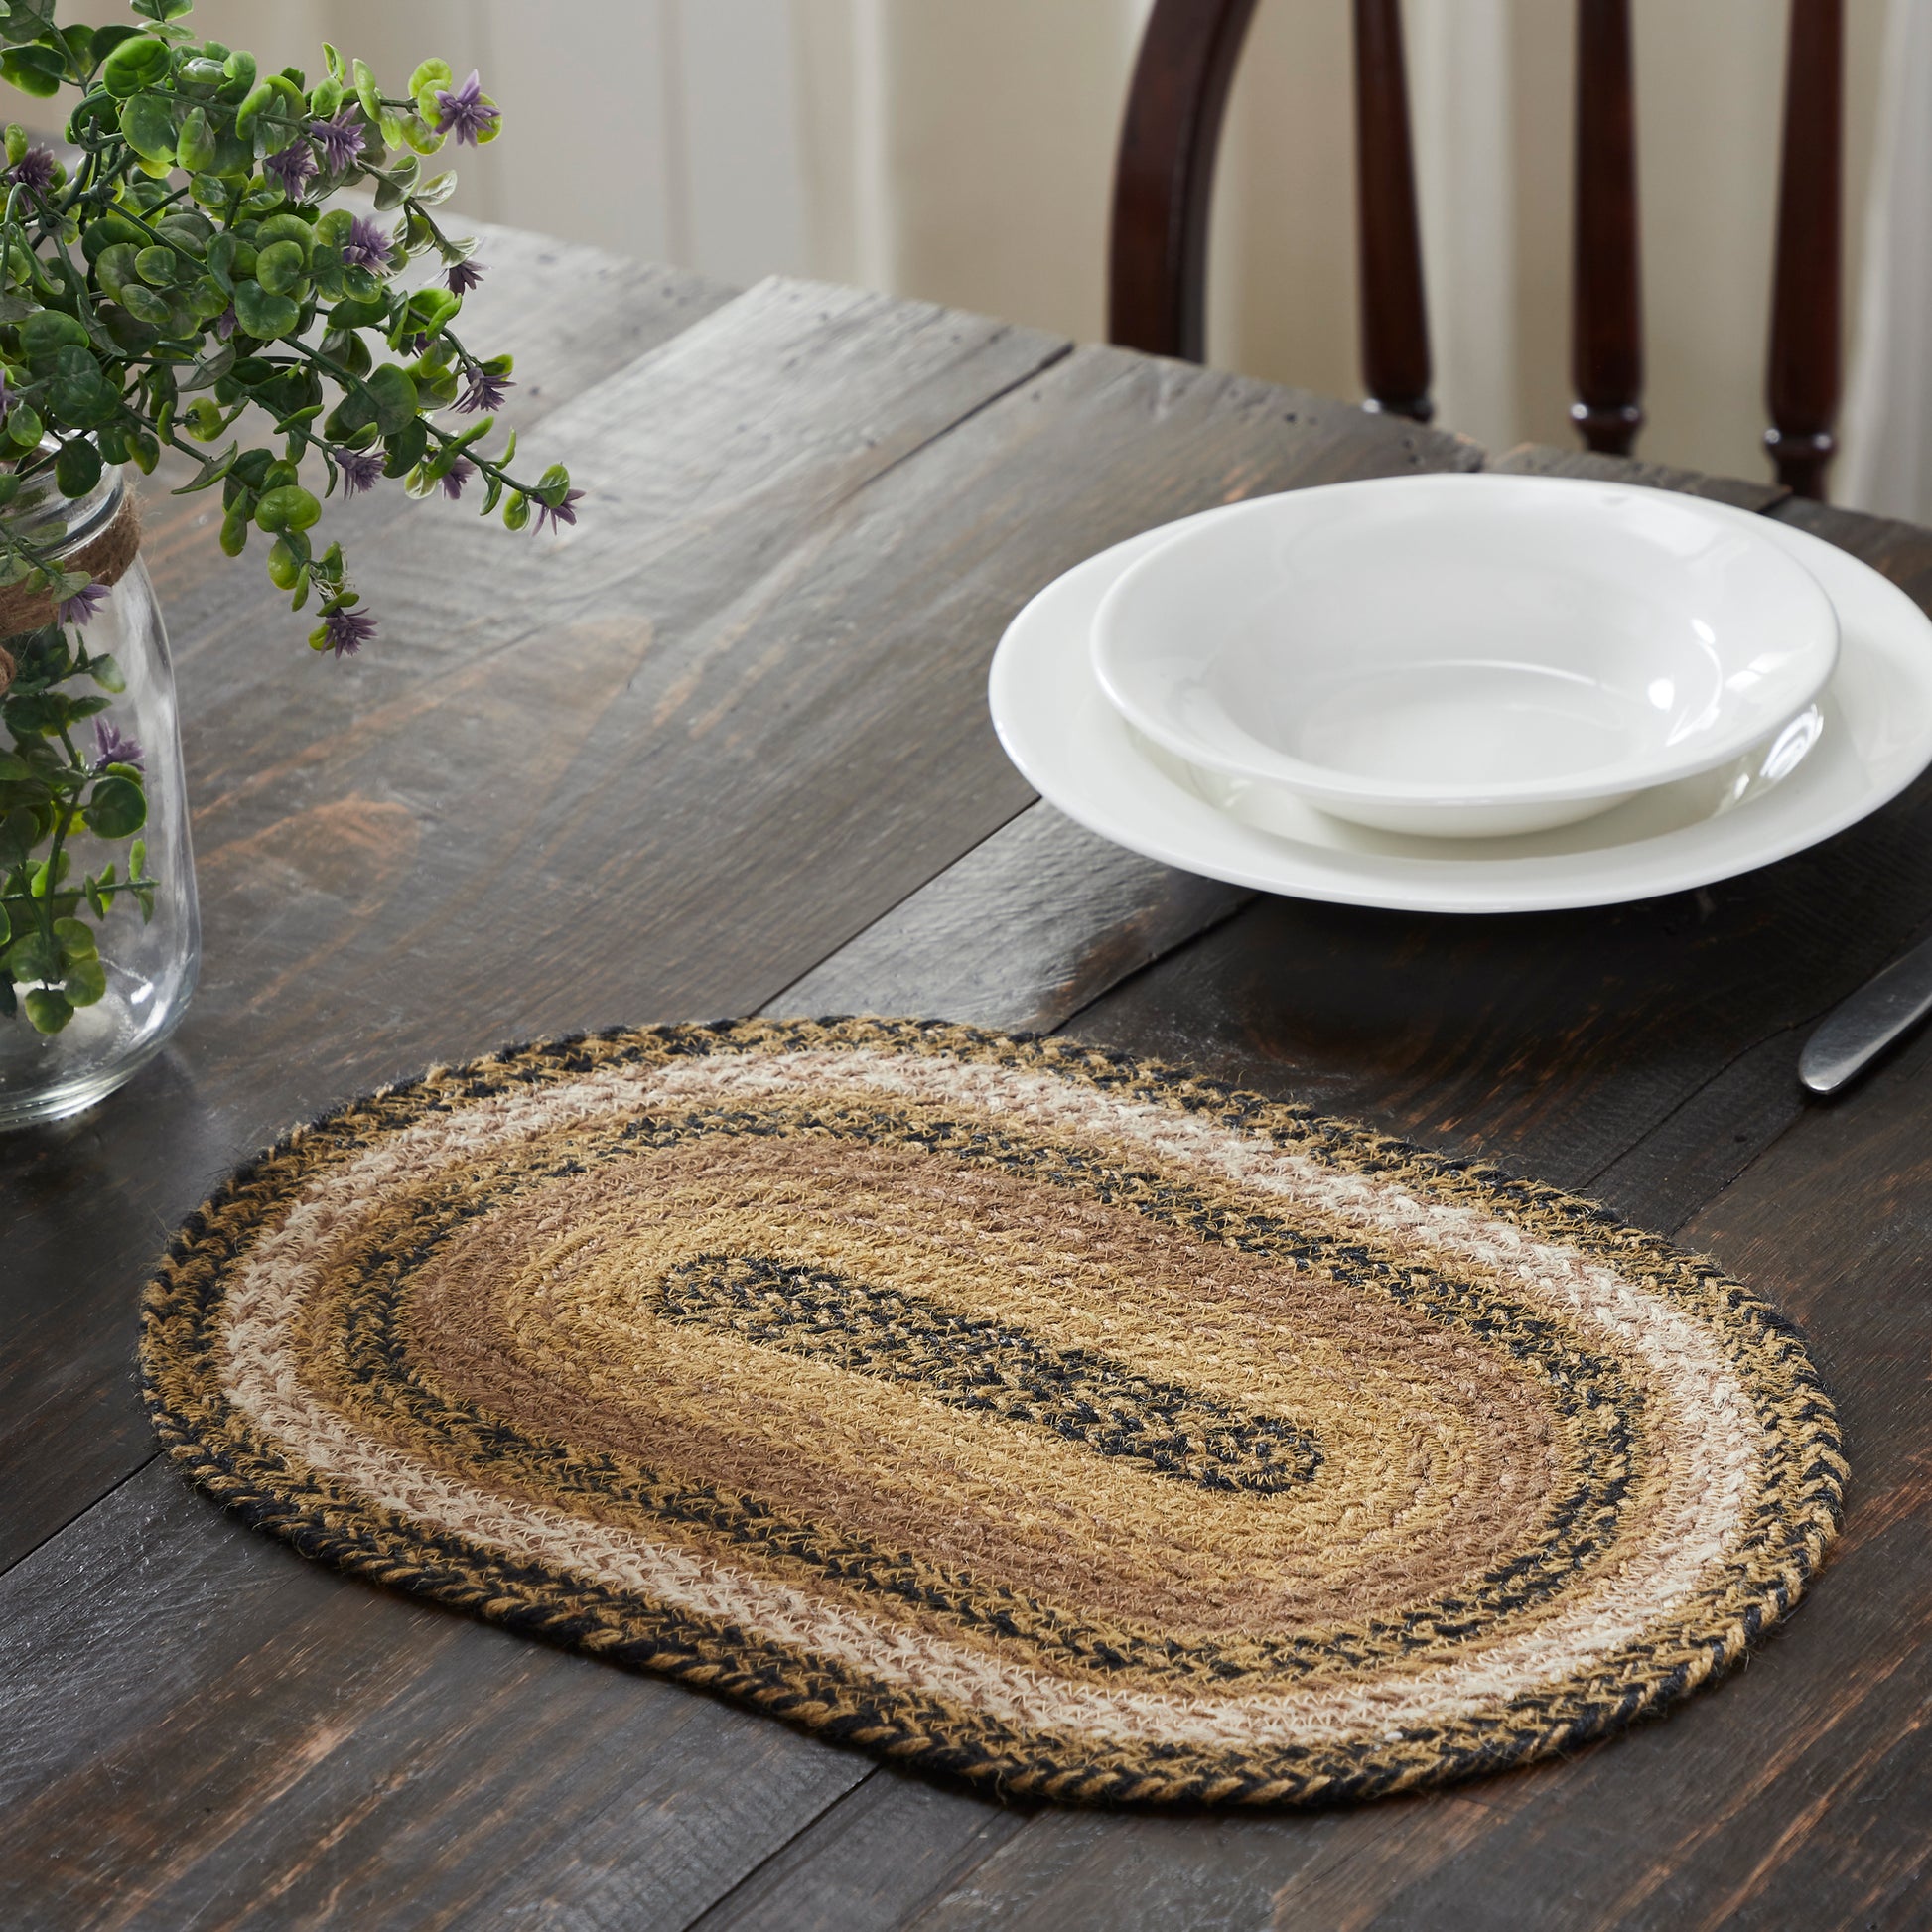 81386-Kettle-Grove-Jute-Oval-Placemat-10x15-image-5